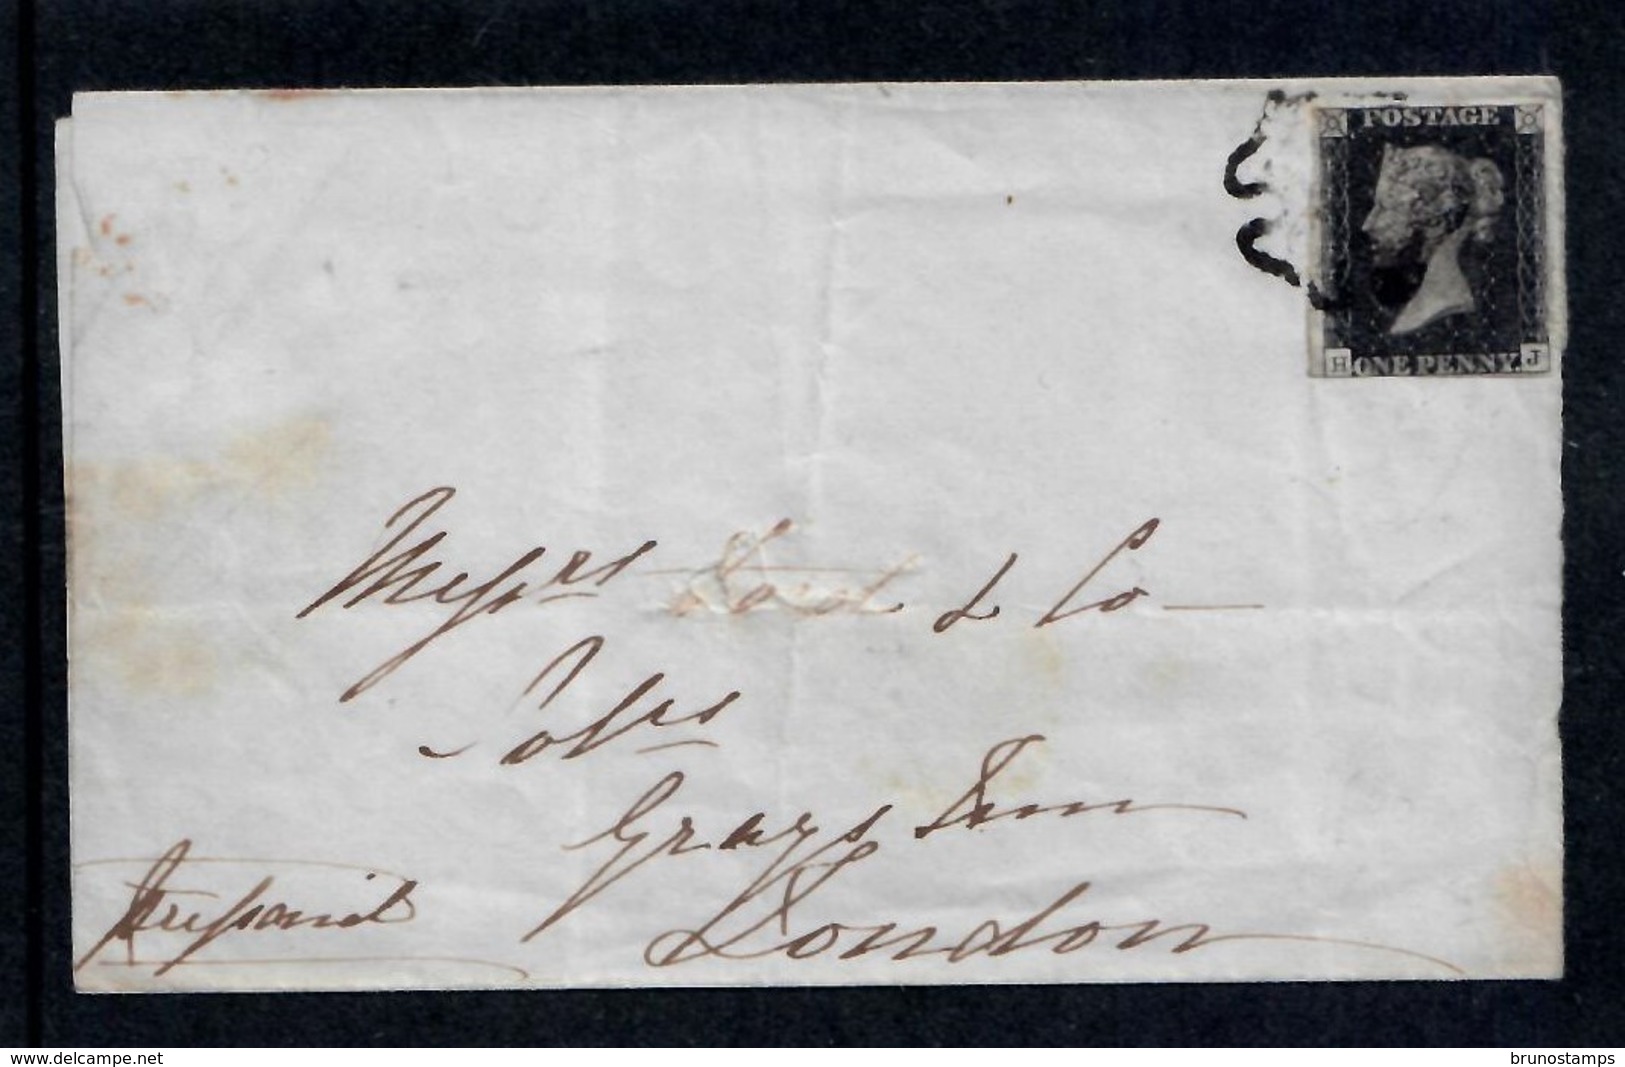 GREAT BRITAIN - 1840  1d BLACK 4 MARGINS  ON COVER  GOOD QUALITY - Covers & Documents